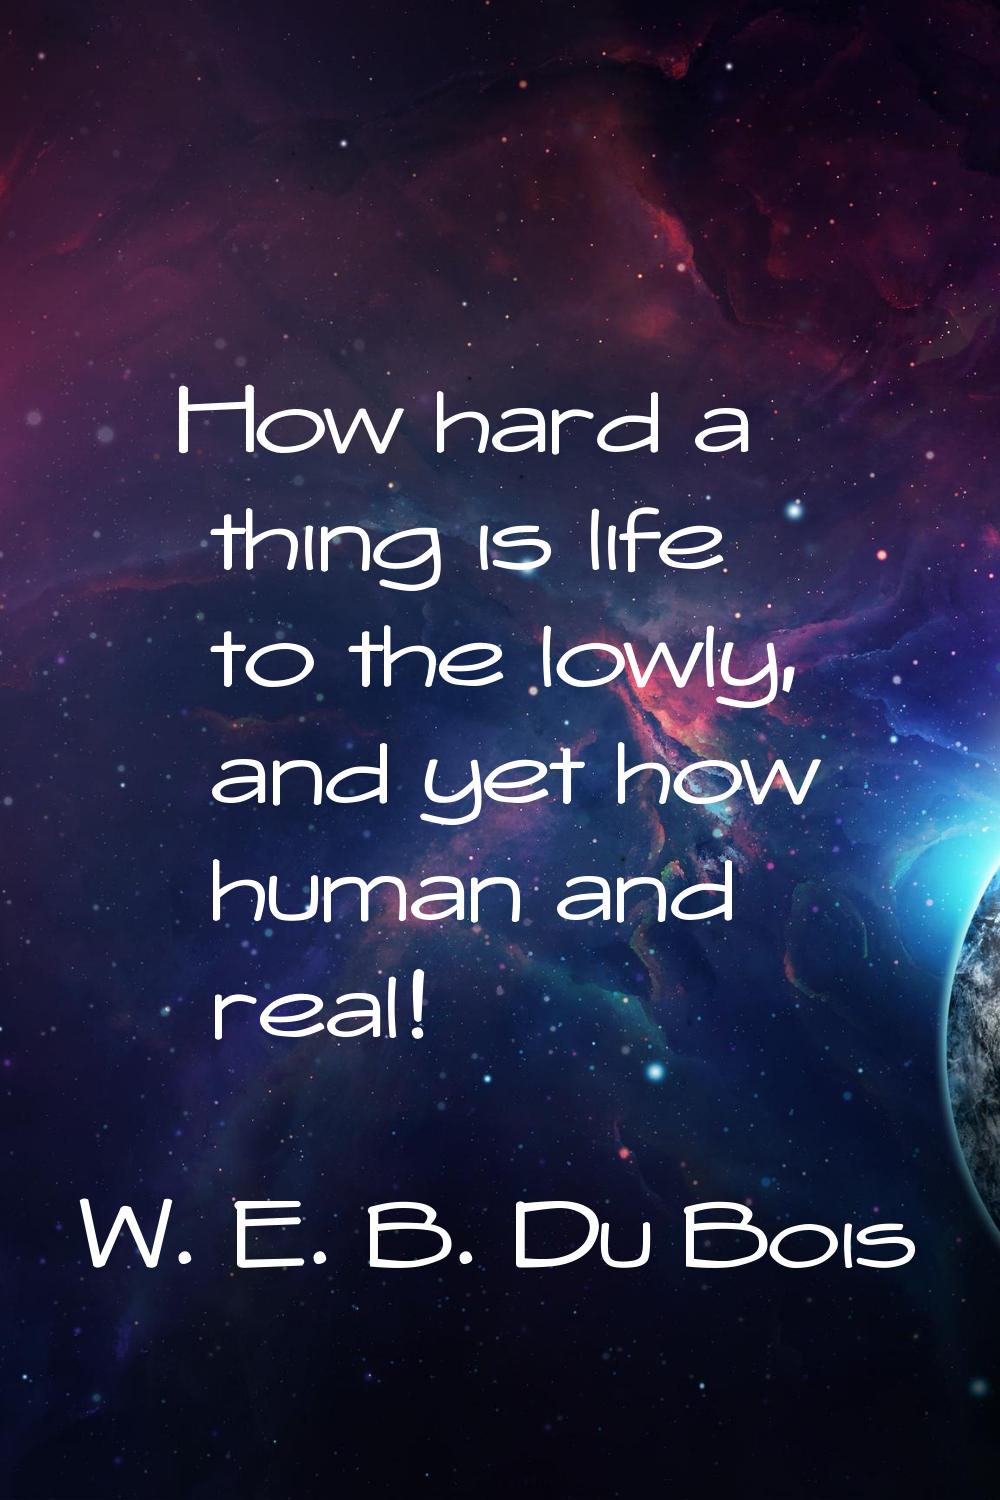 How hard a thing is life to the lowly, and yet how human and real!